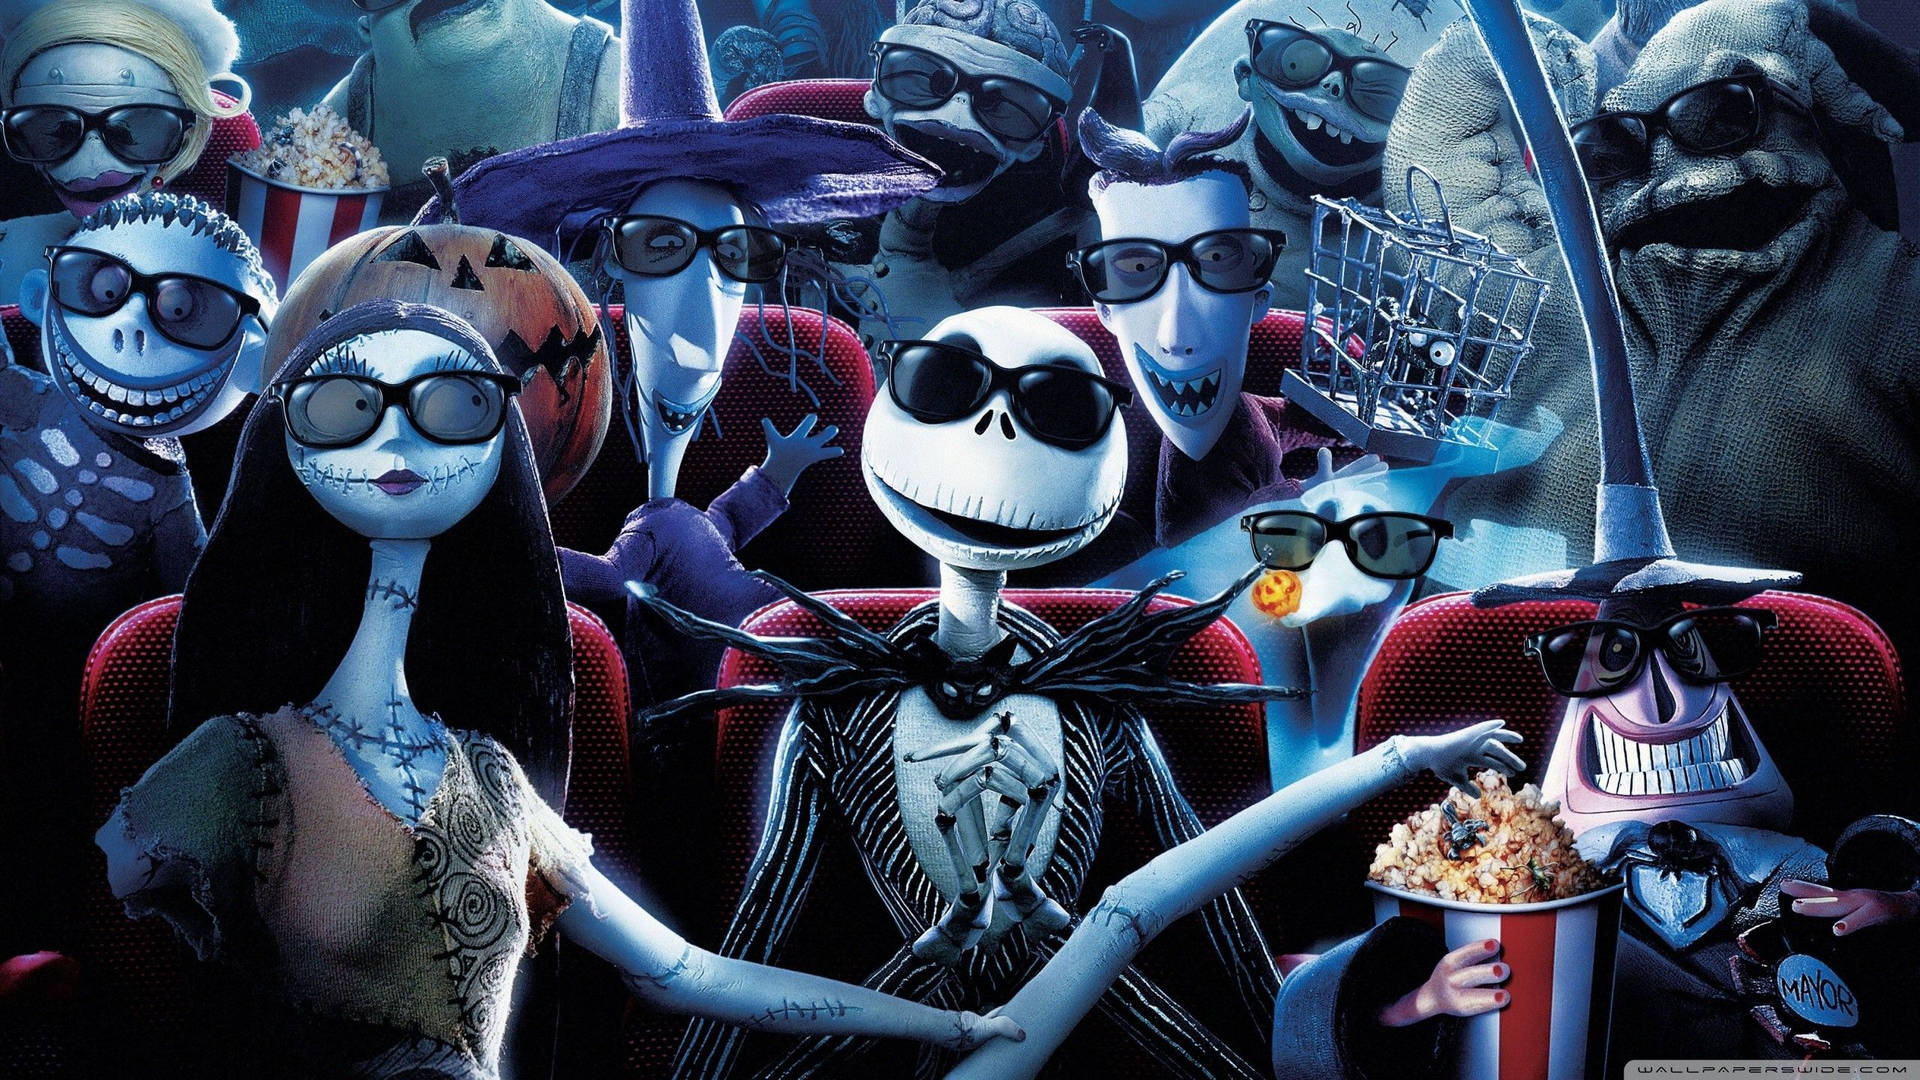 1920x1080 52 Nightmare Before Christmas Wallpapers \u0026 Backgrounds For FREE | Wallpapers .com